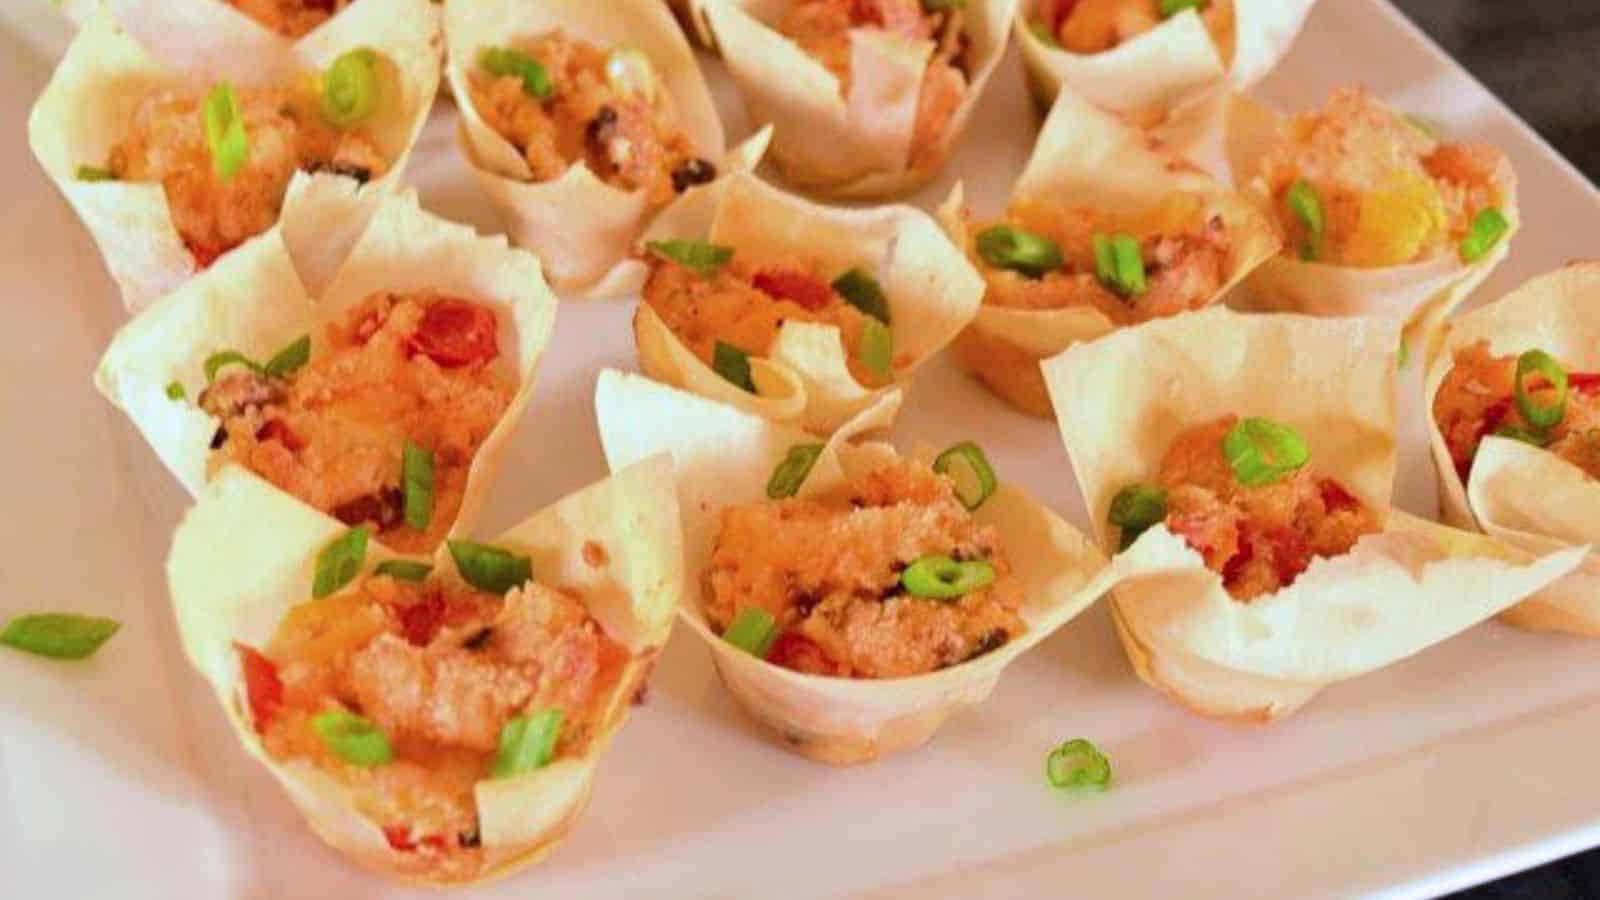 Image shows a white plate with tomato bacon cups on it.